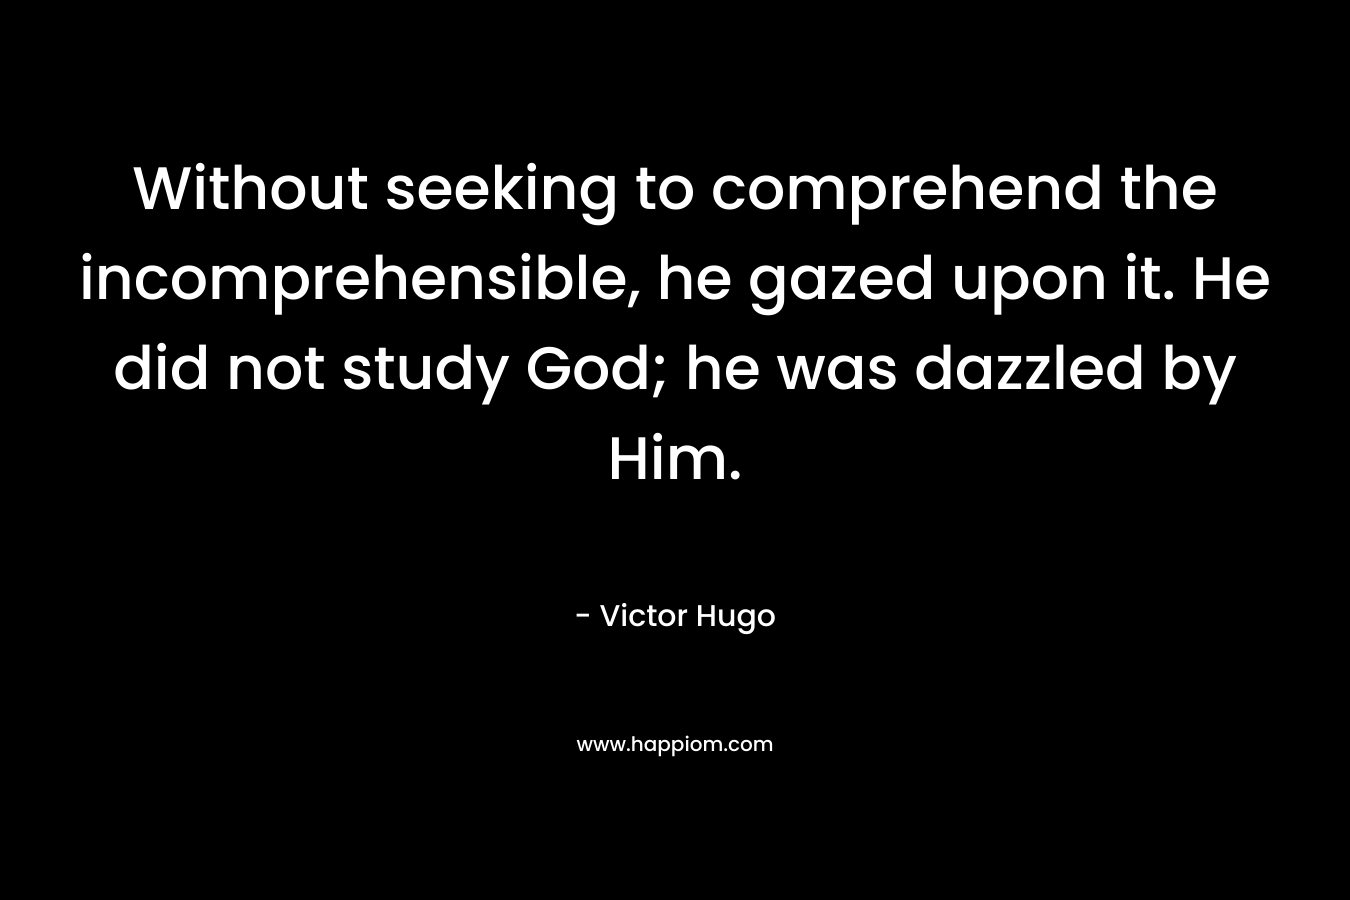 Without seeking to comprehend the incomprehensible, he gazed upon it. He did not study God; he was dazzled by Him.